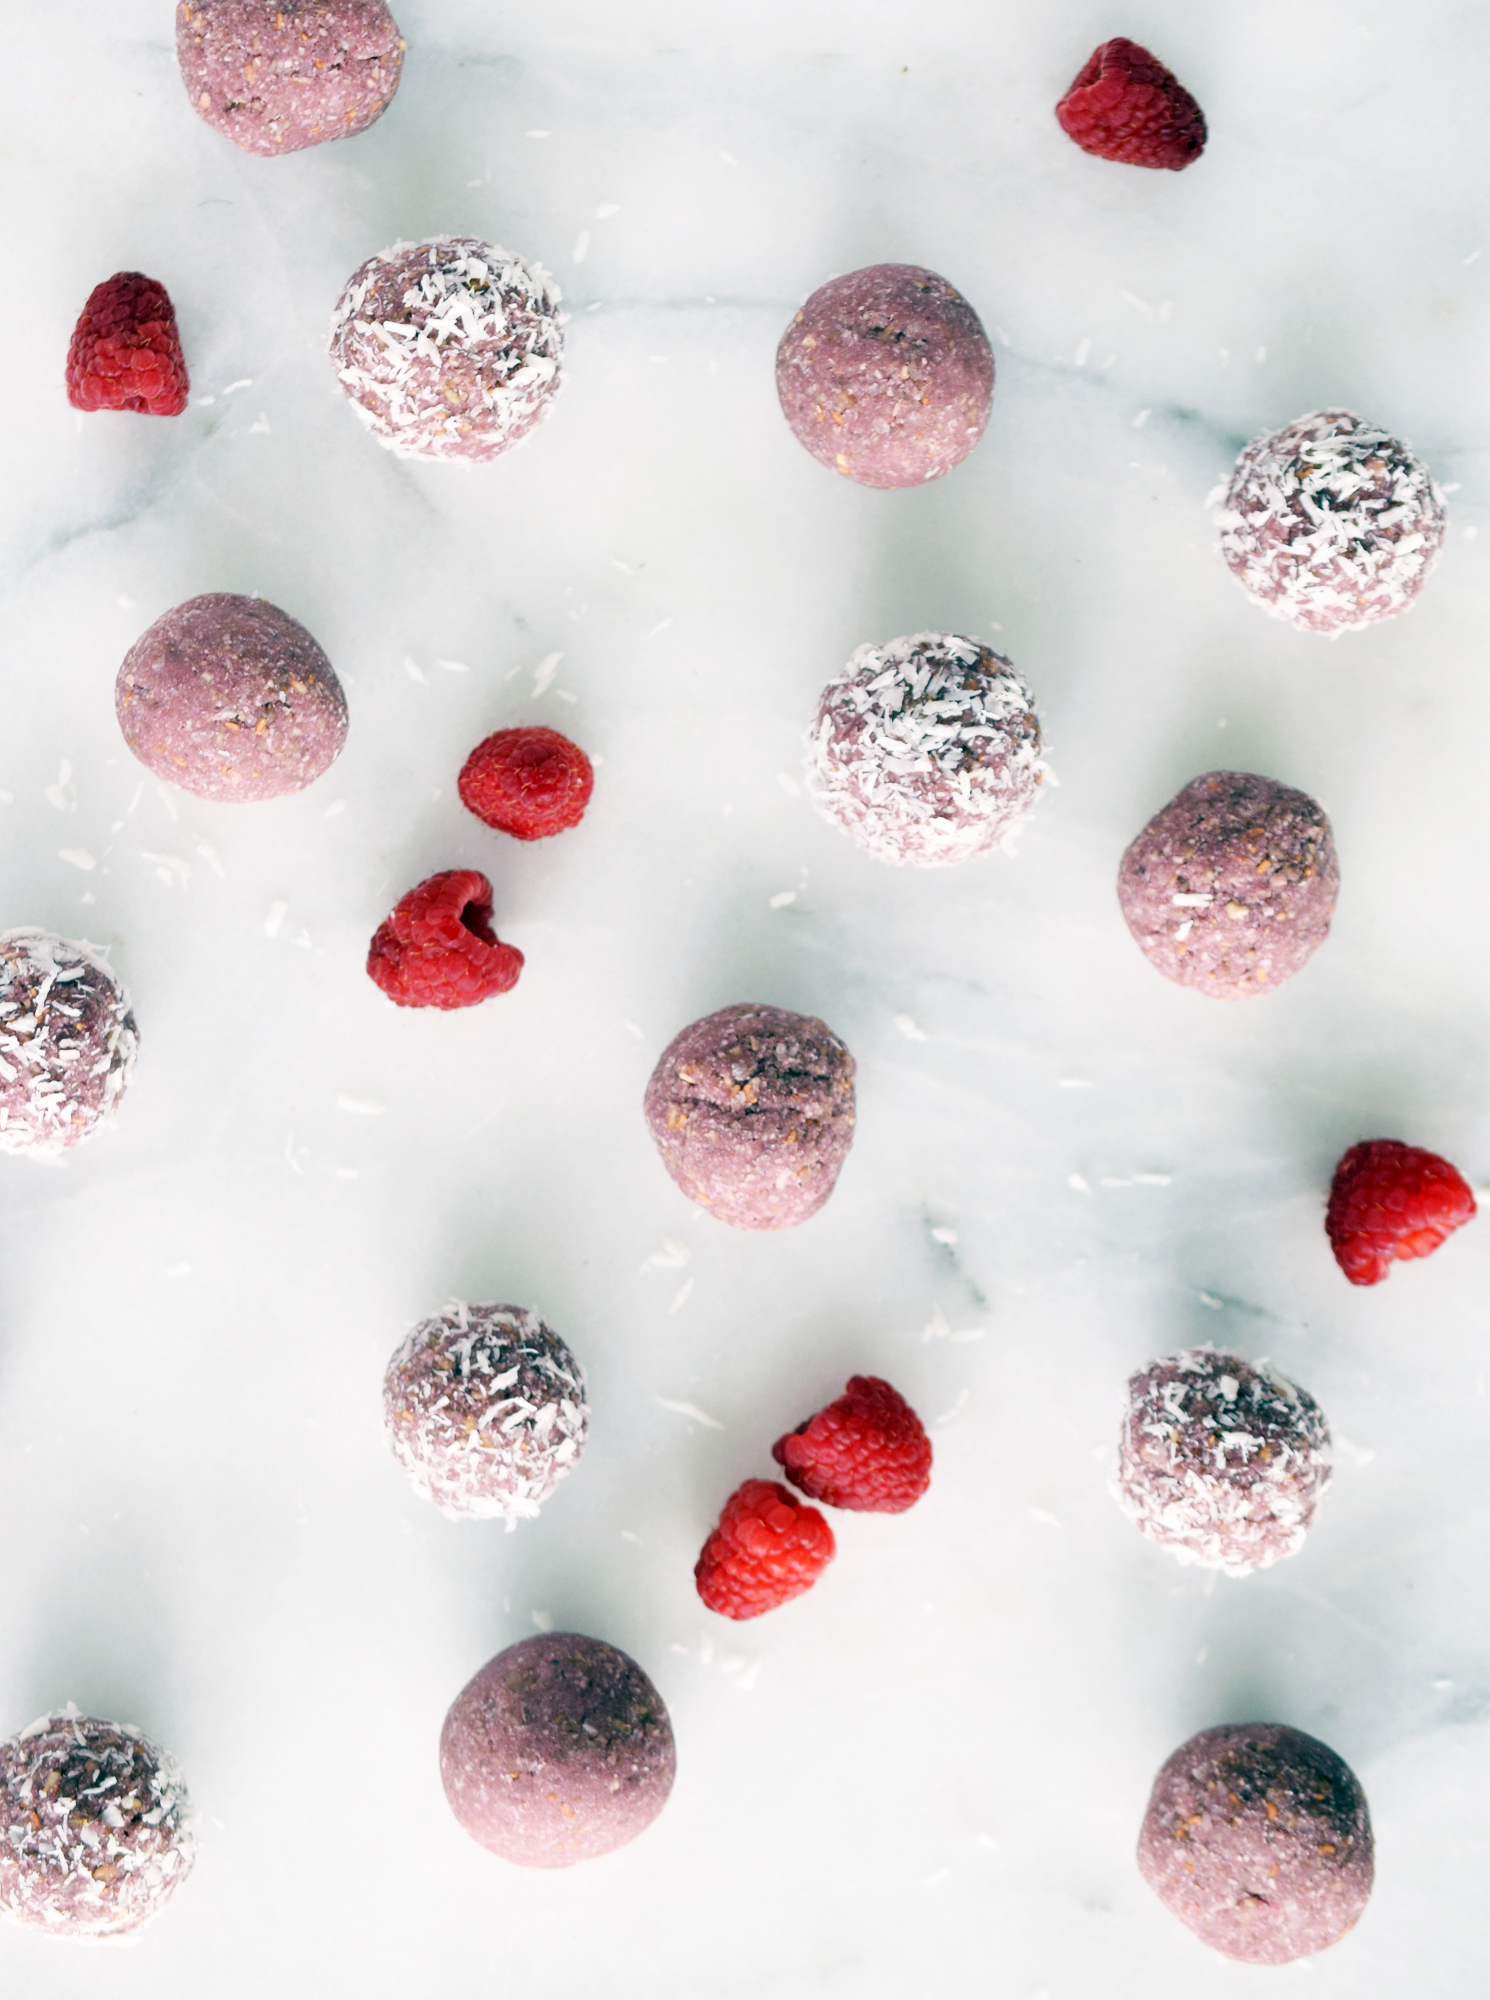 raspberry coconut energy balls on a marble counter with fresh raspberries around them